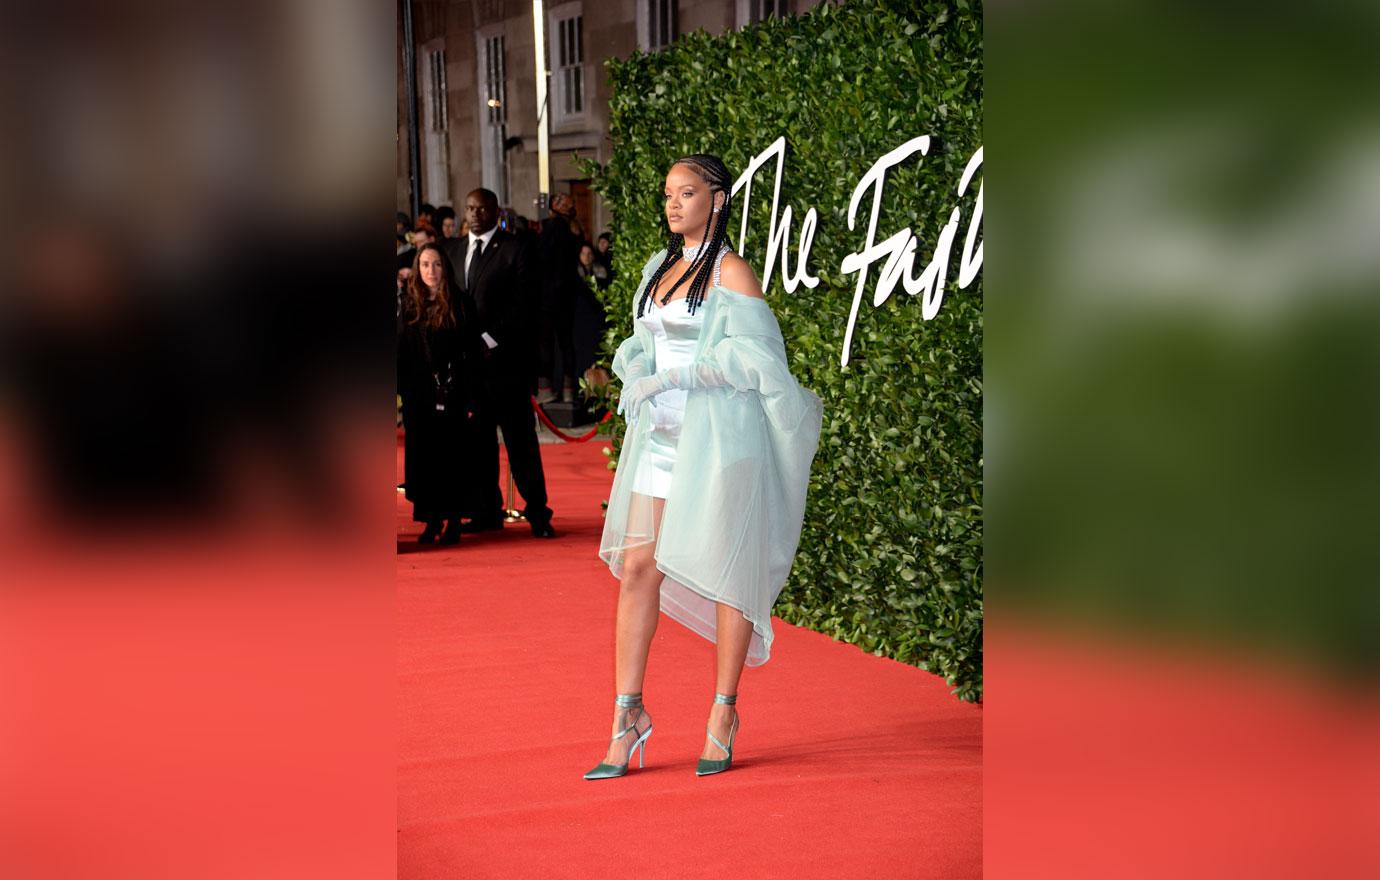 Rihanna Wows in Her Fenty Line at Fashion Awards 2019!: Photo 4396376, 2019 Fashion Awards, ASAP Rocky, Rihanna Photos